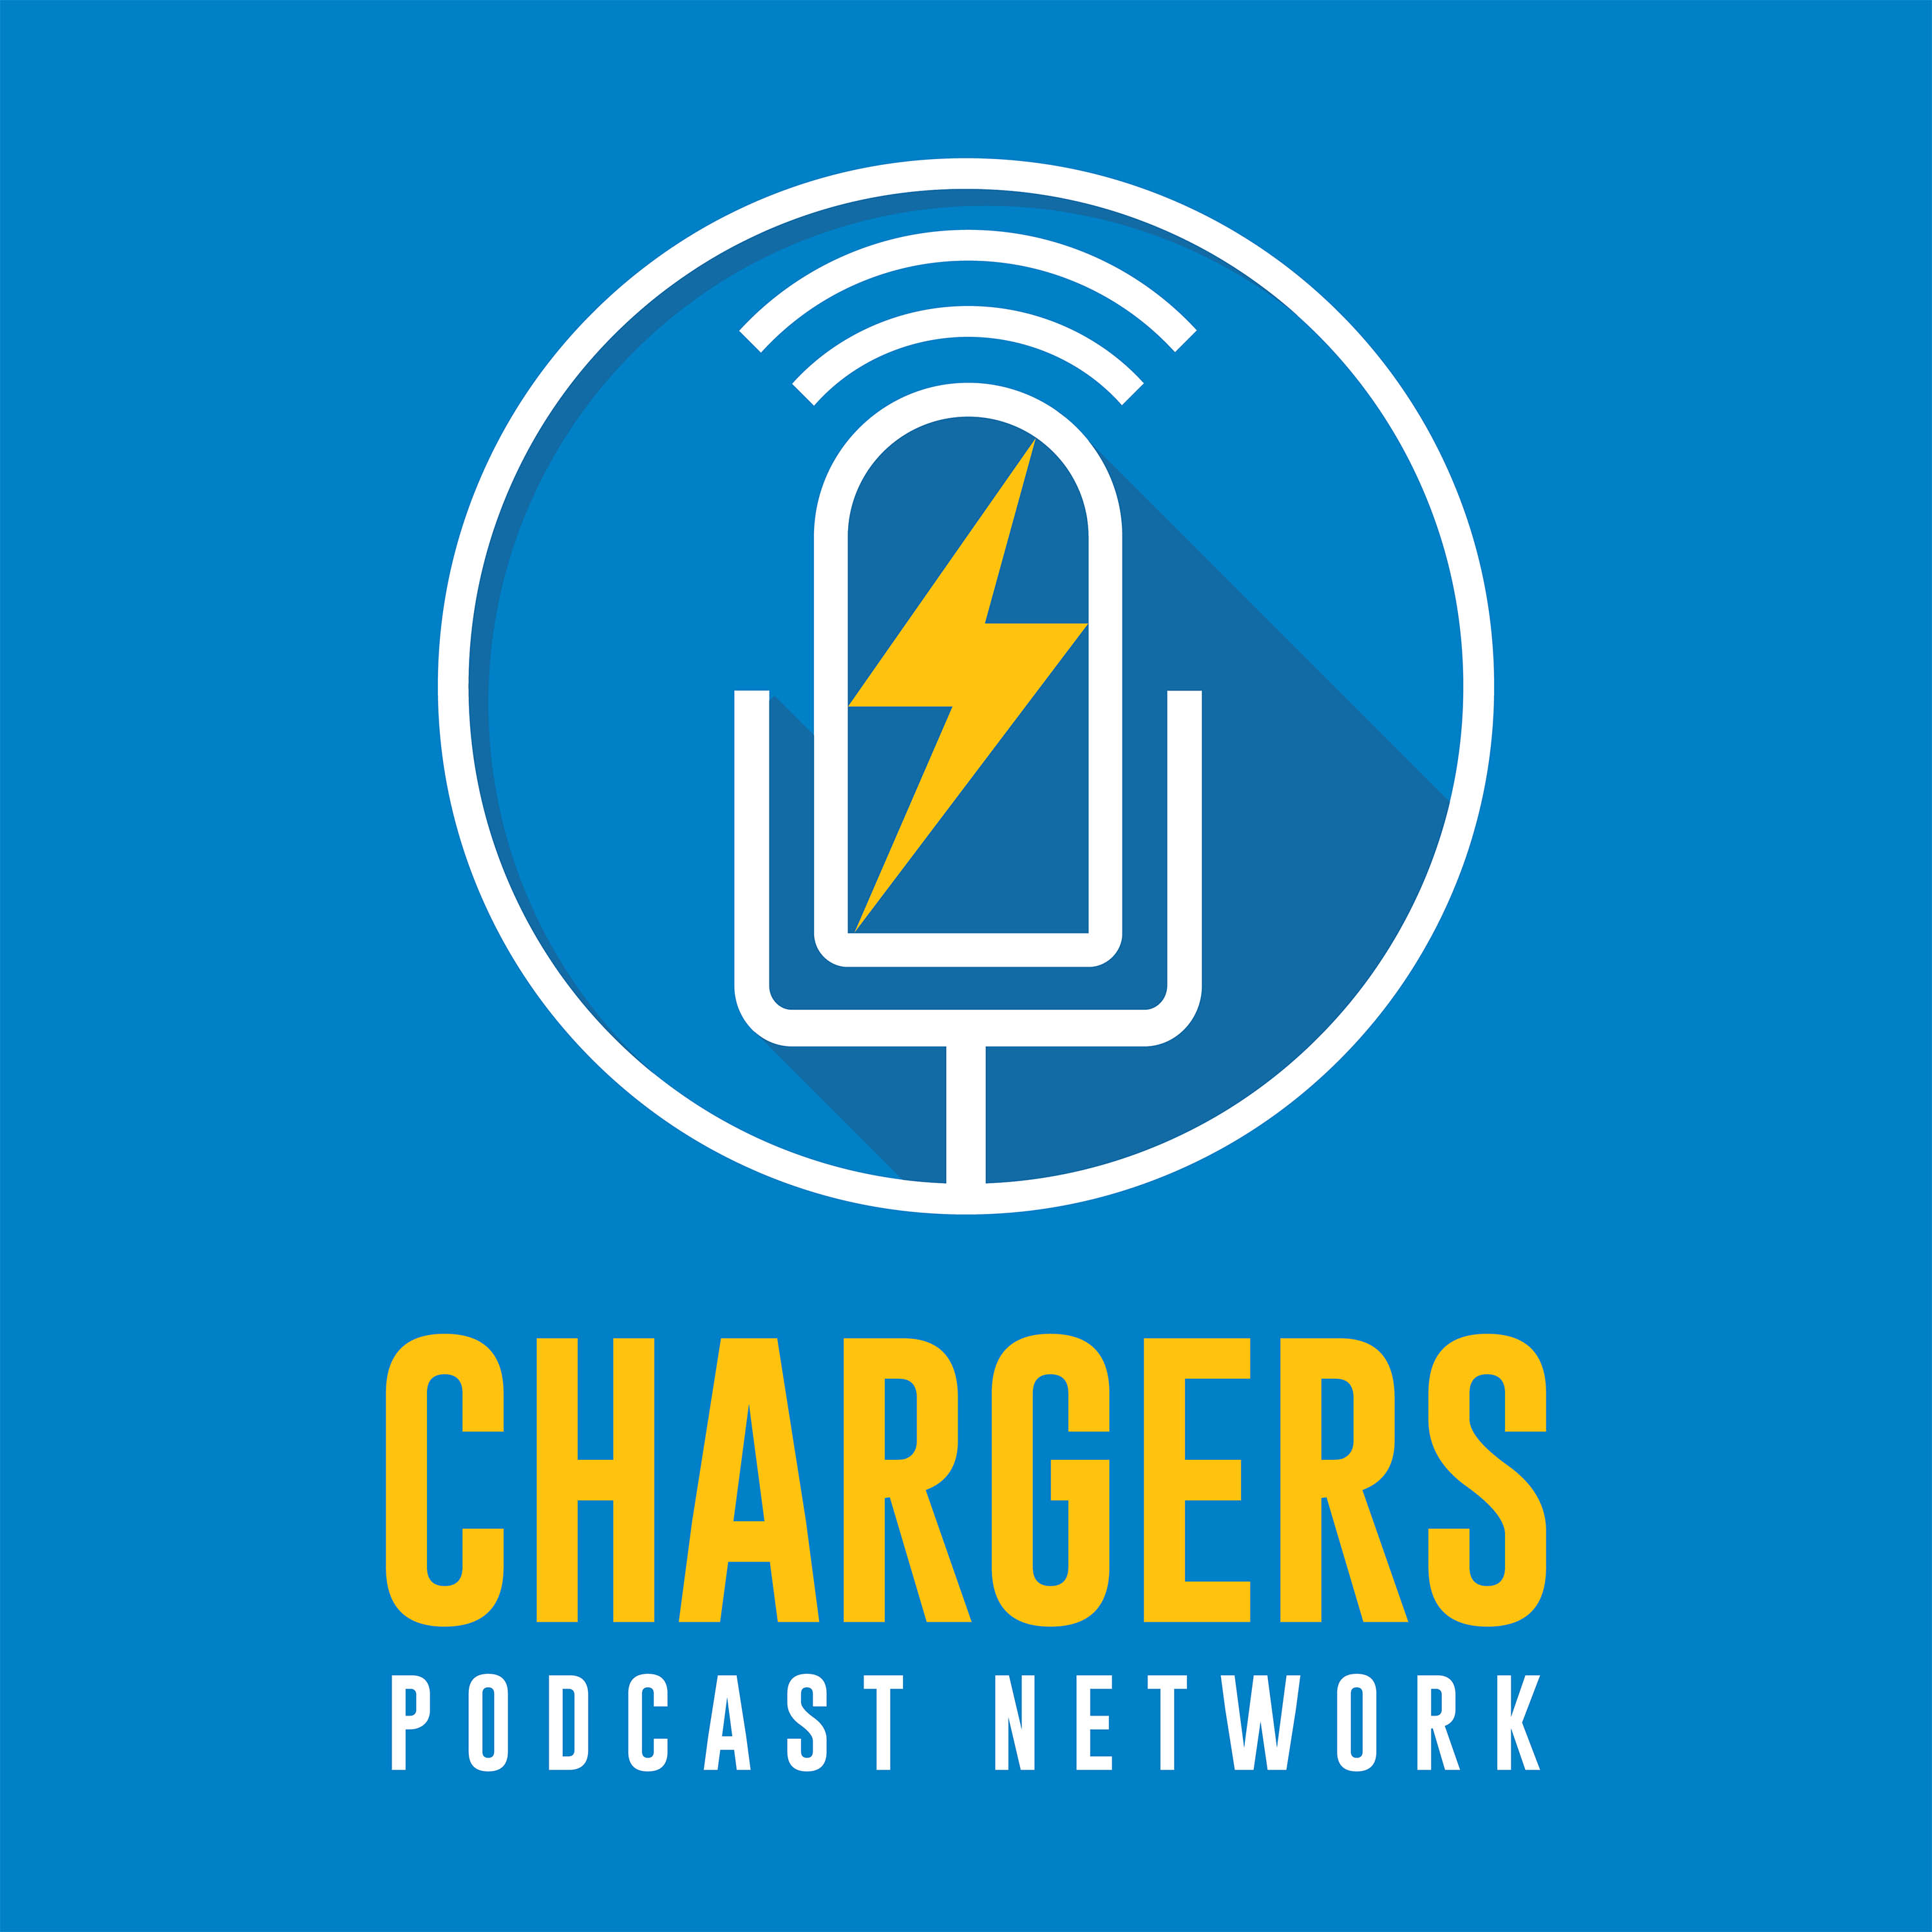 Chargers Weekly: Where Bolts Stand At The Bye & Fan Q&A